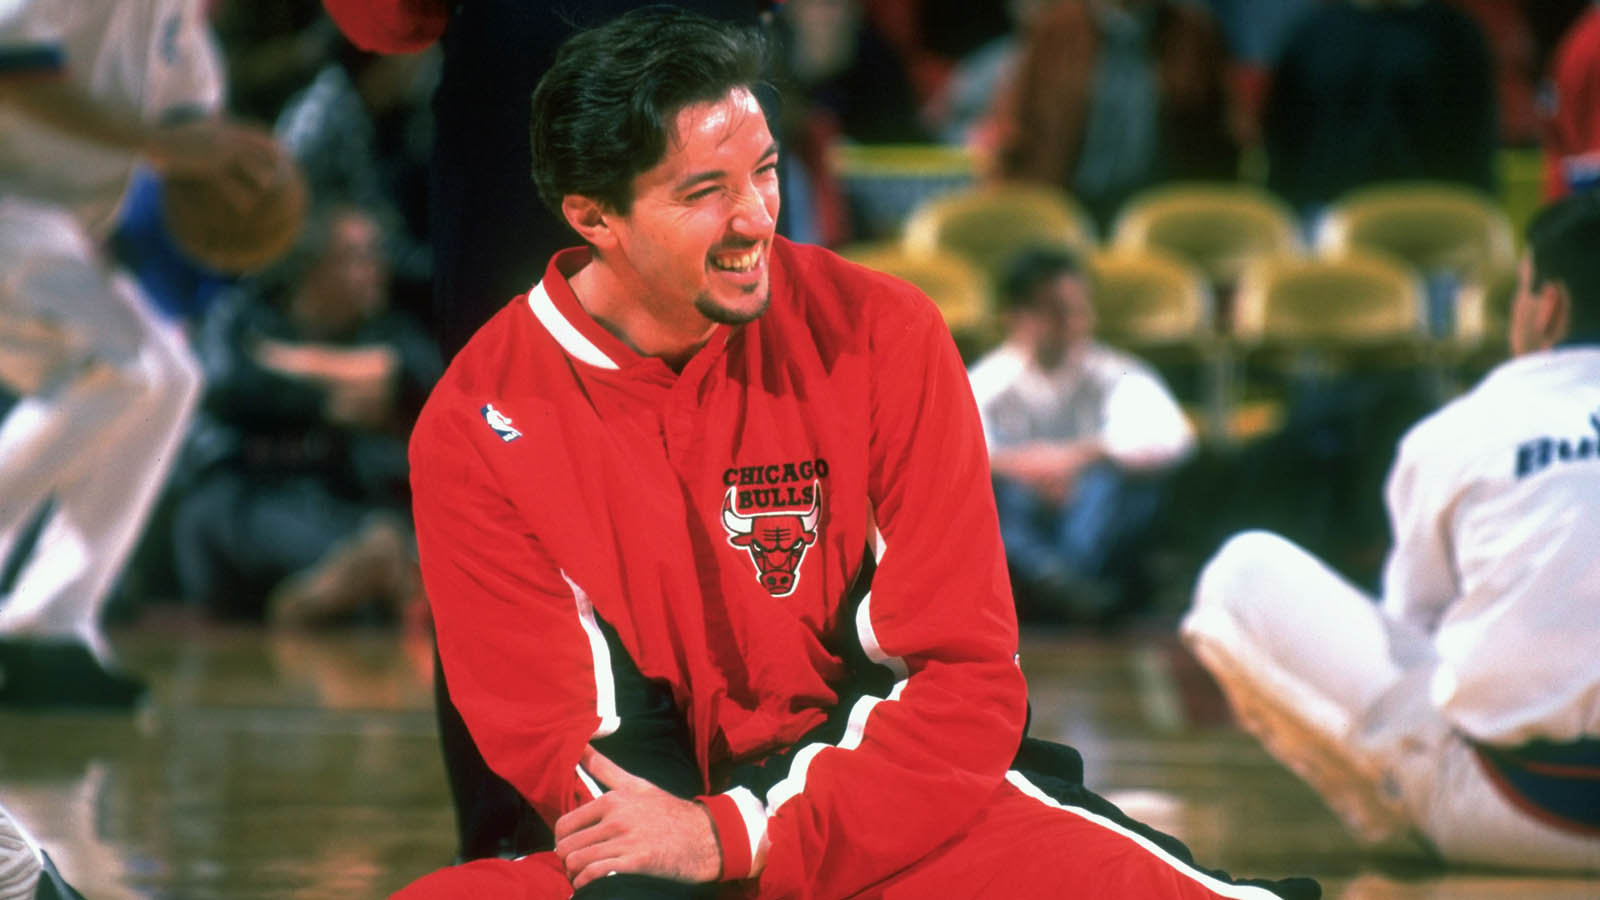 Chicago Bulls on X: Toni Kukoc is in the house! @AmericanExpress